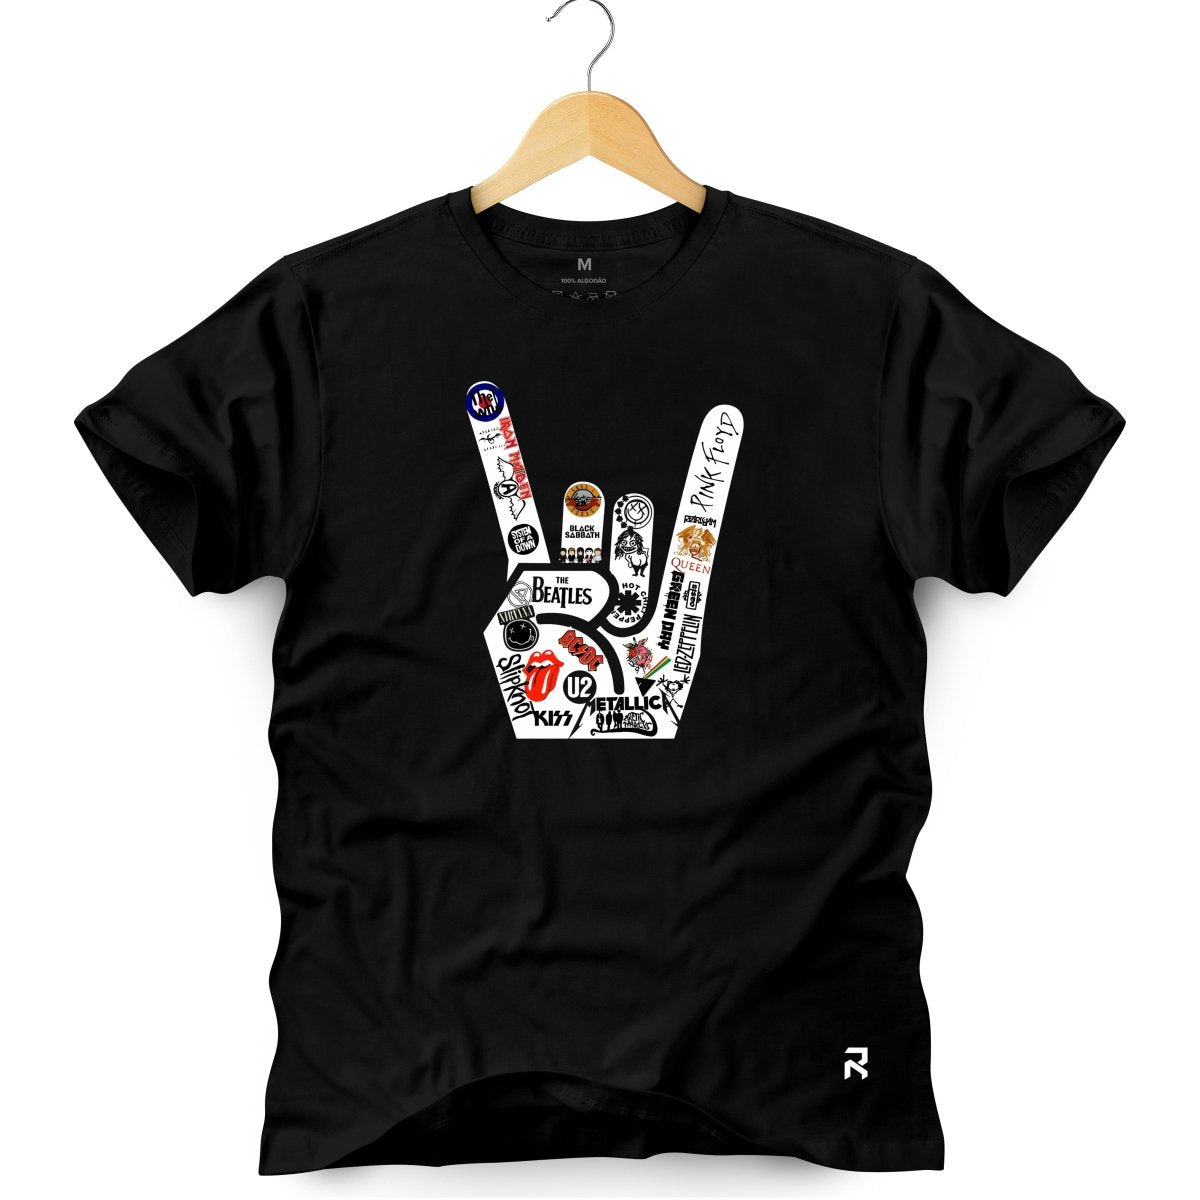 Camiseta Unissex Masculina Rock On And Roll Mão Hand Metal Music